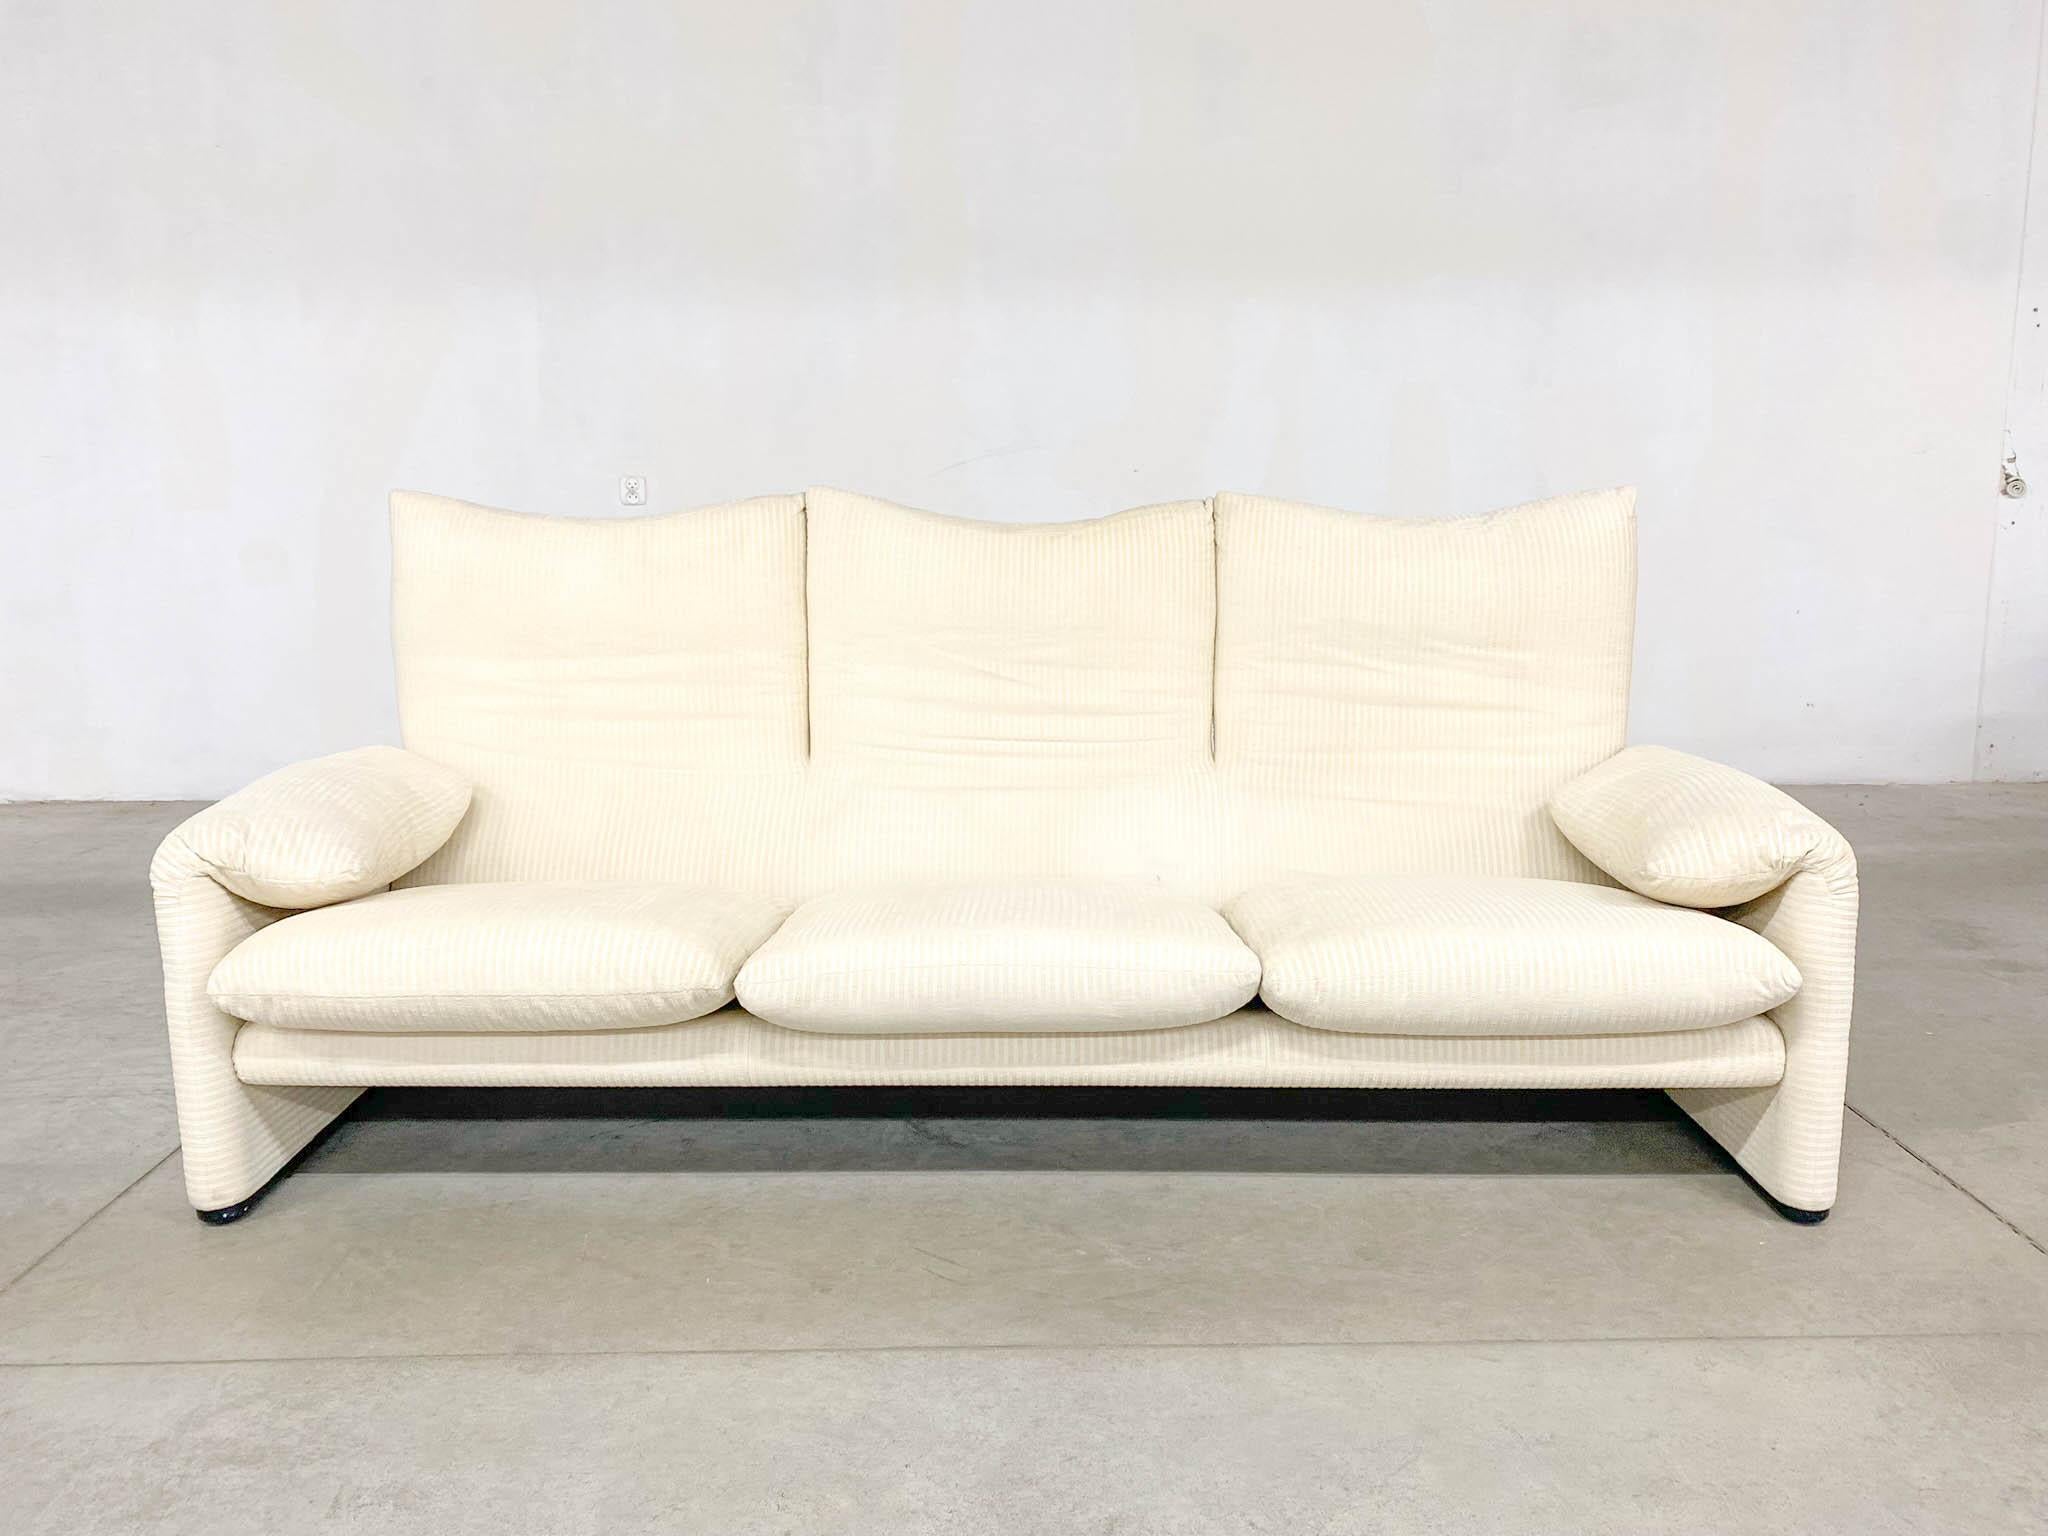 Discover the international bestseller – Maralunga Sofa. With its inviting shapes and unique characteristic feature, the Maralunga series is a testament to innovation and comfort. Engineered by Cassina, the avant-garde mechanism of the Maralunga sofa